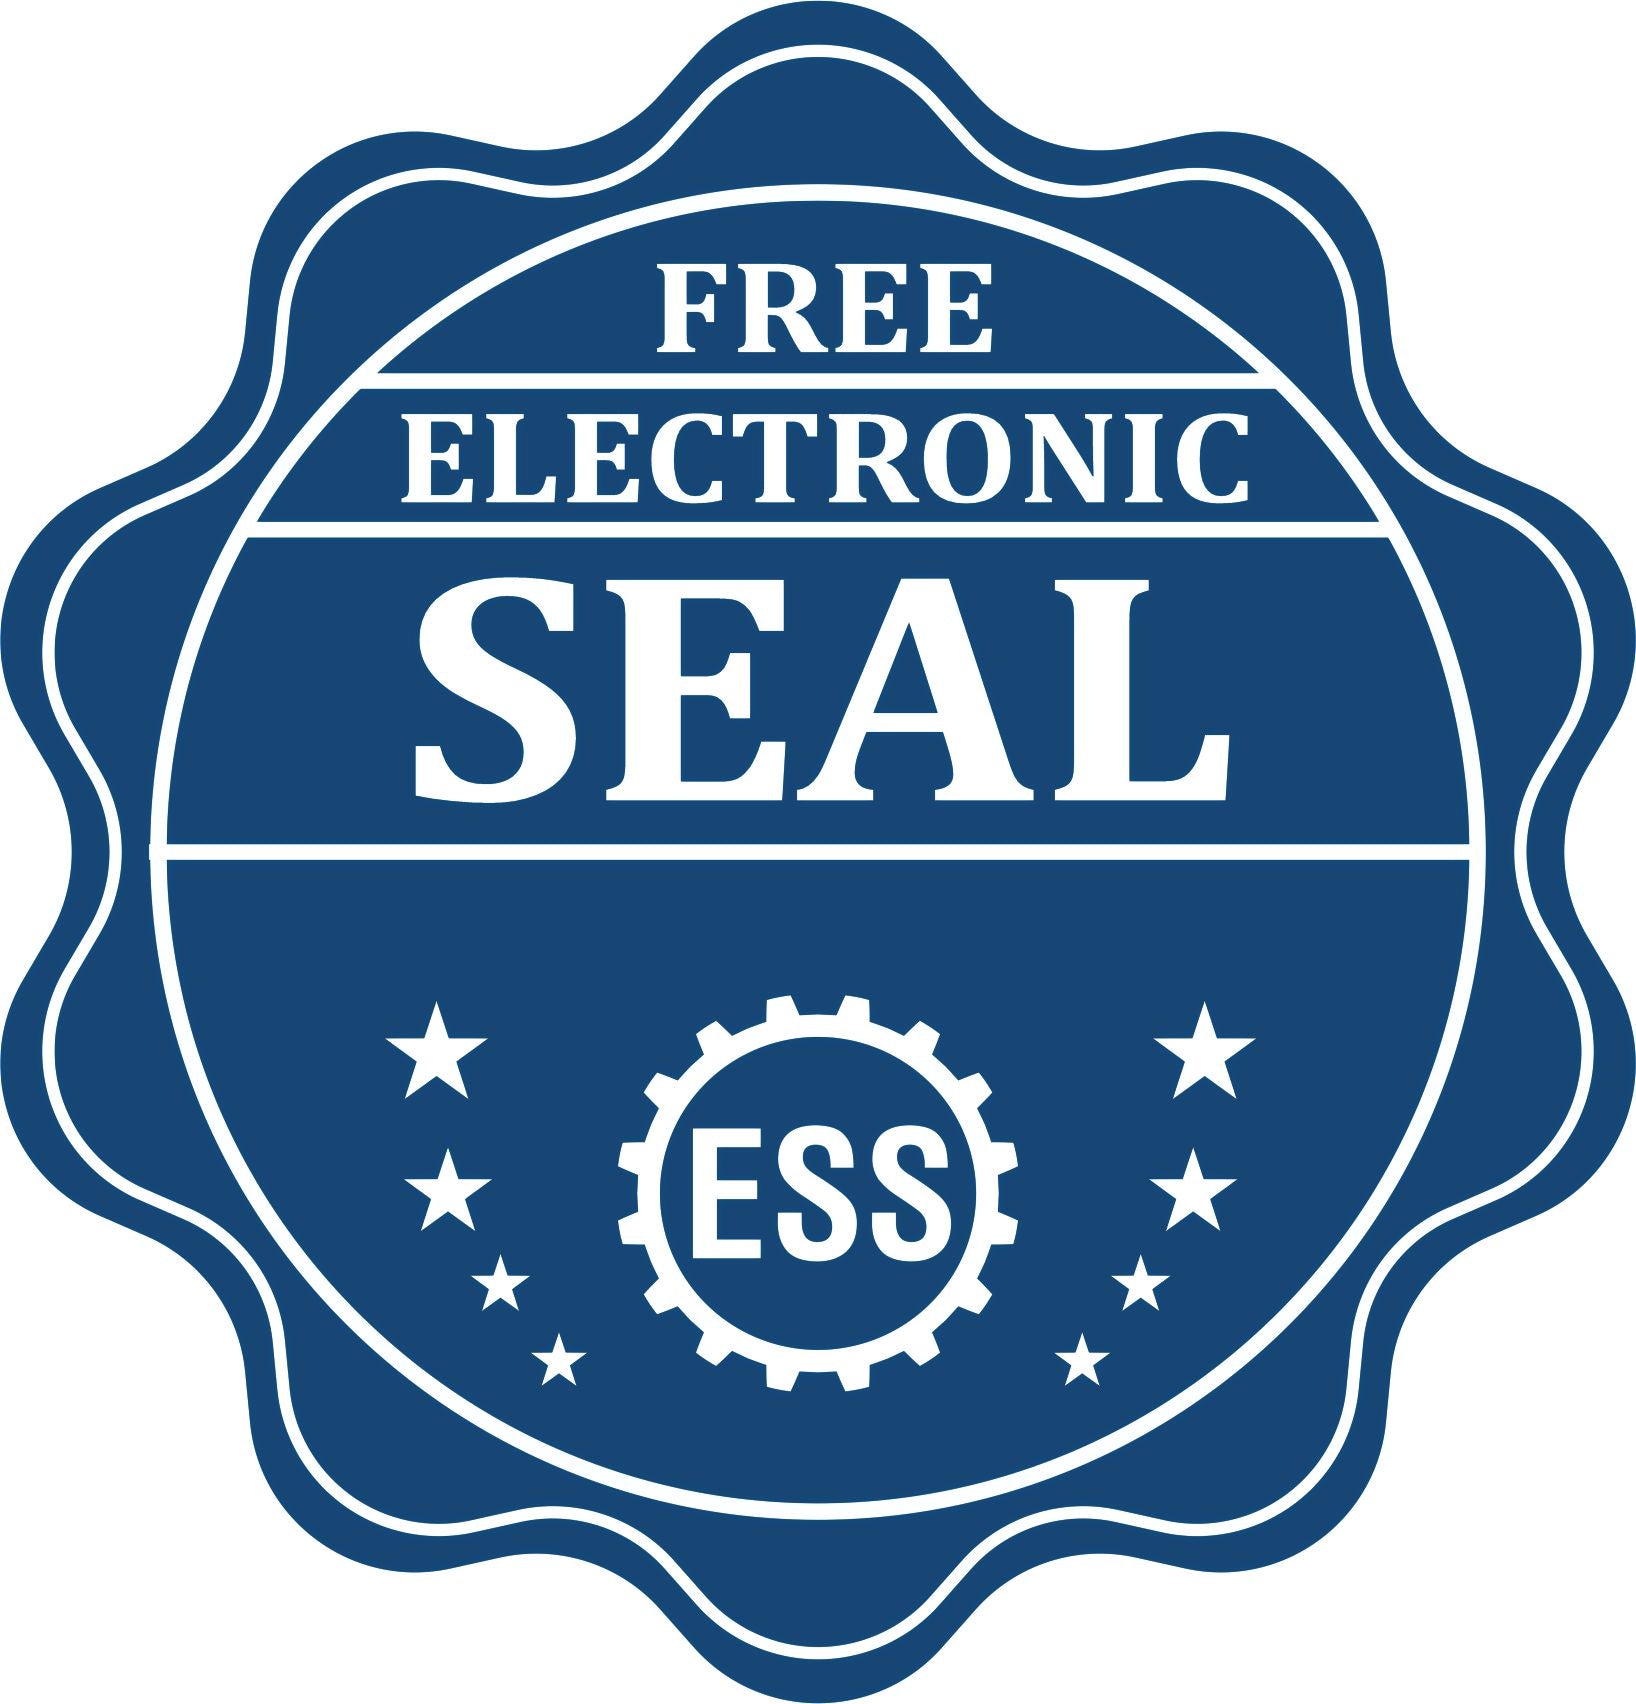 A badge showing a free electronic seal for the Gift Illinois Engineer Seal with stars and the ESS gear on the emblem.